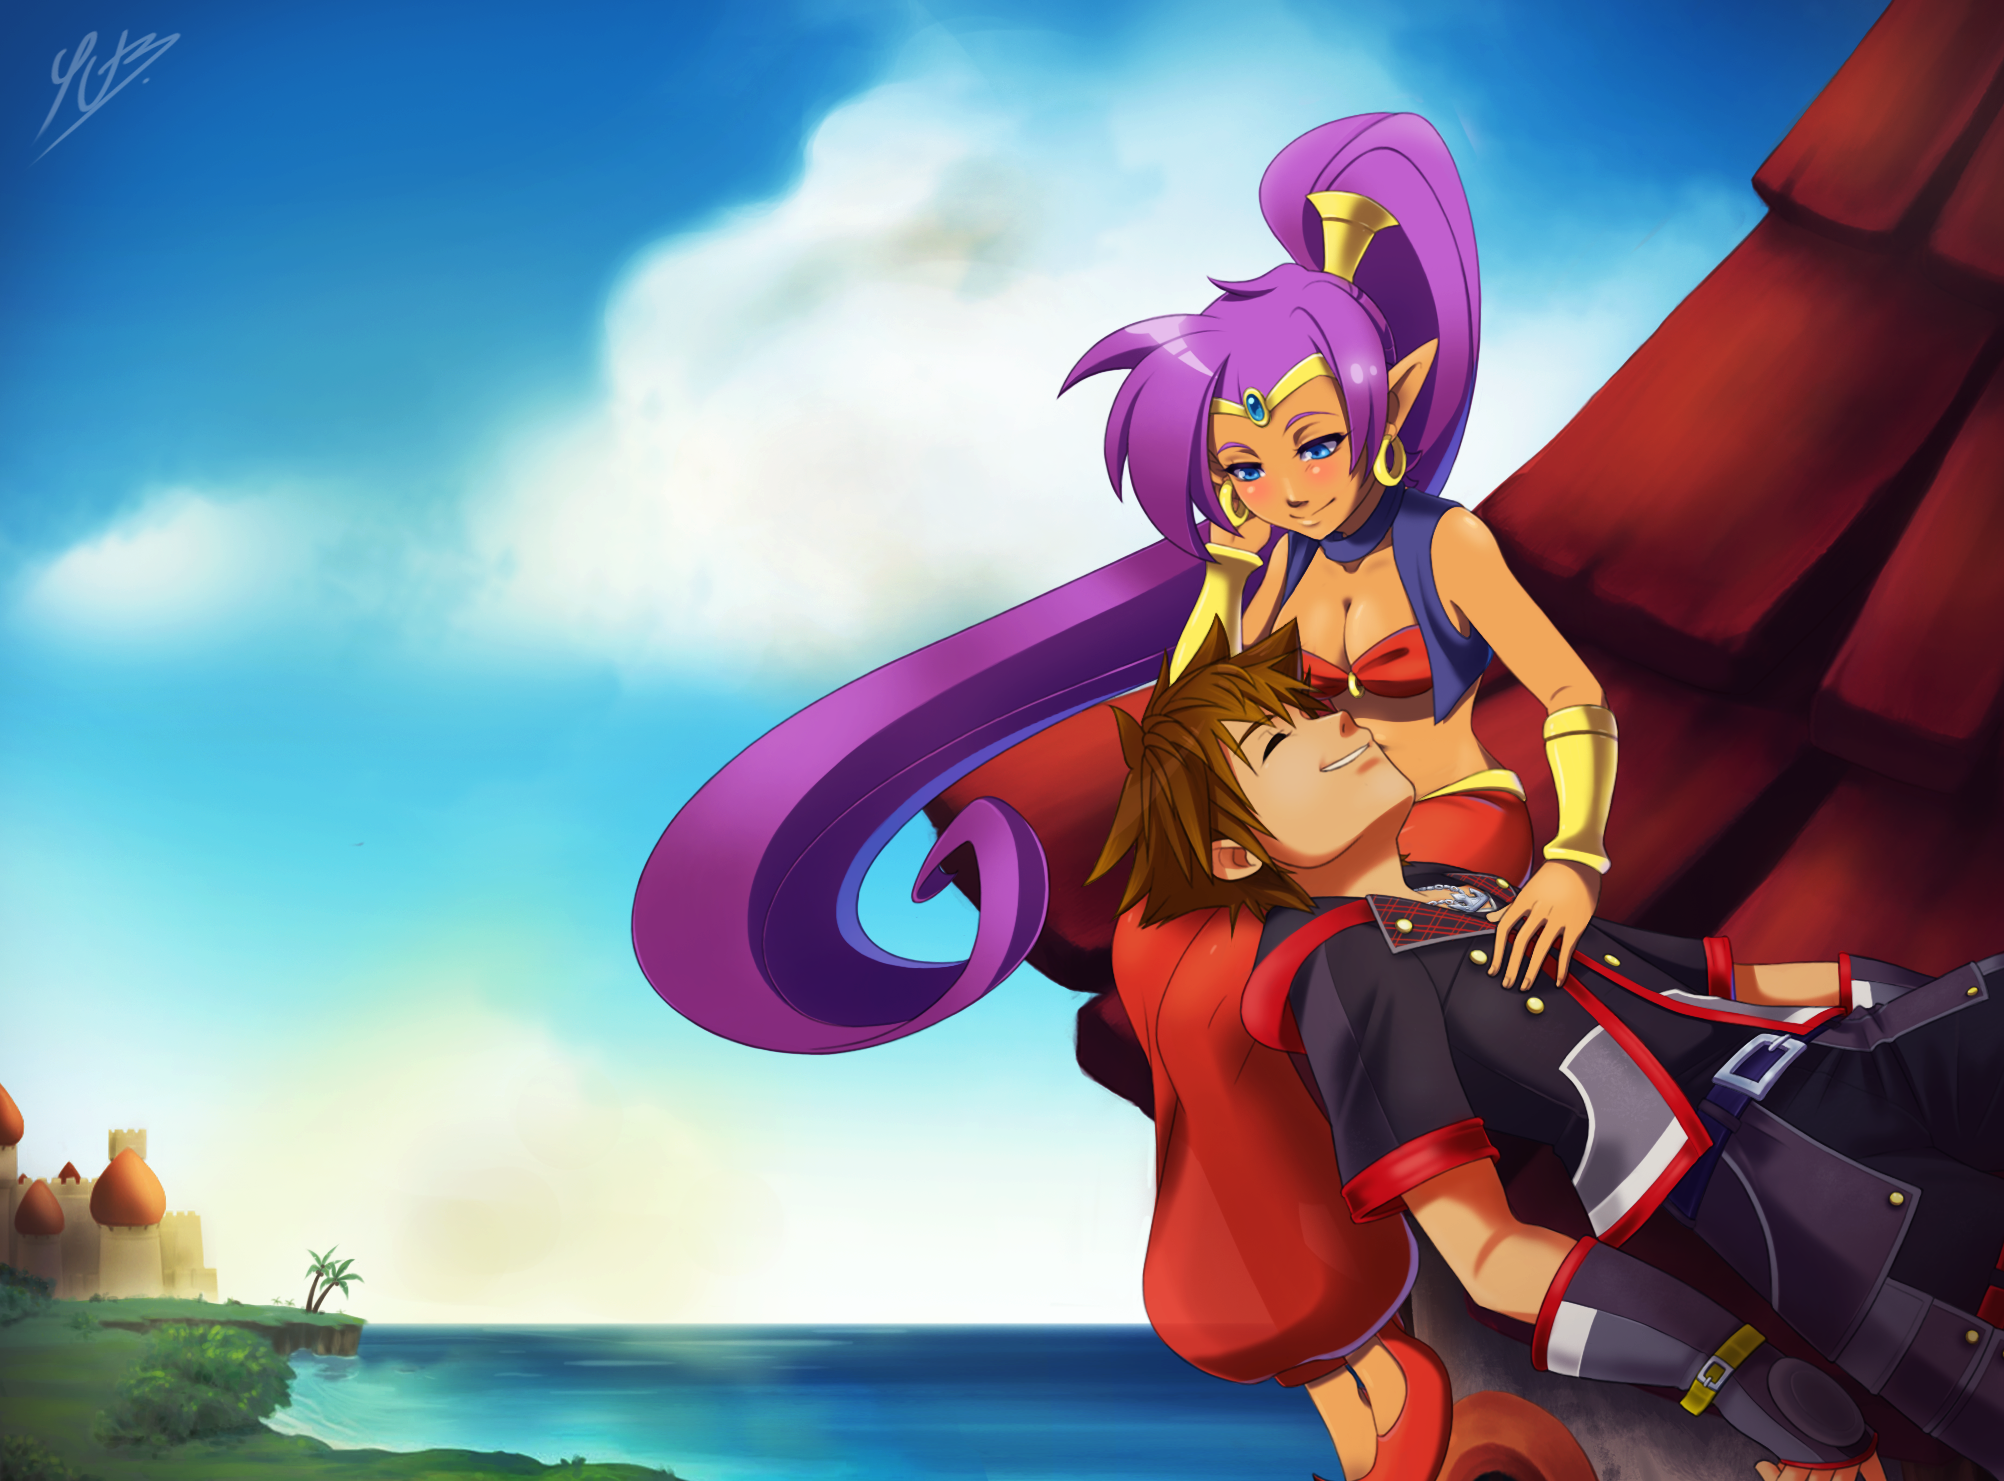 sora_shantae_edited_picture_by_linkerluis-dag0t1z.png.